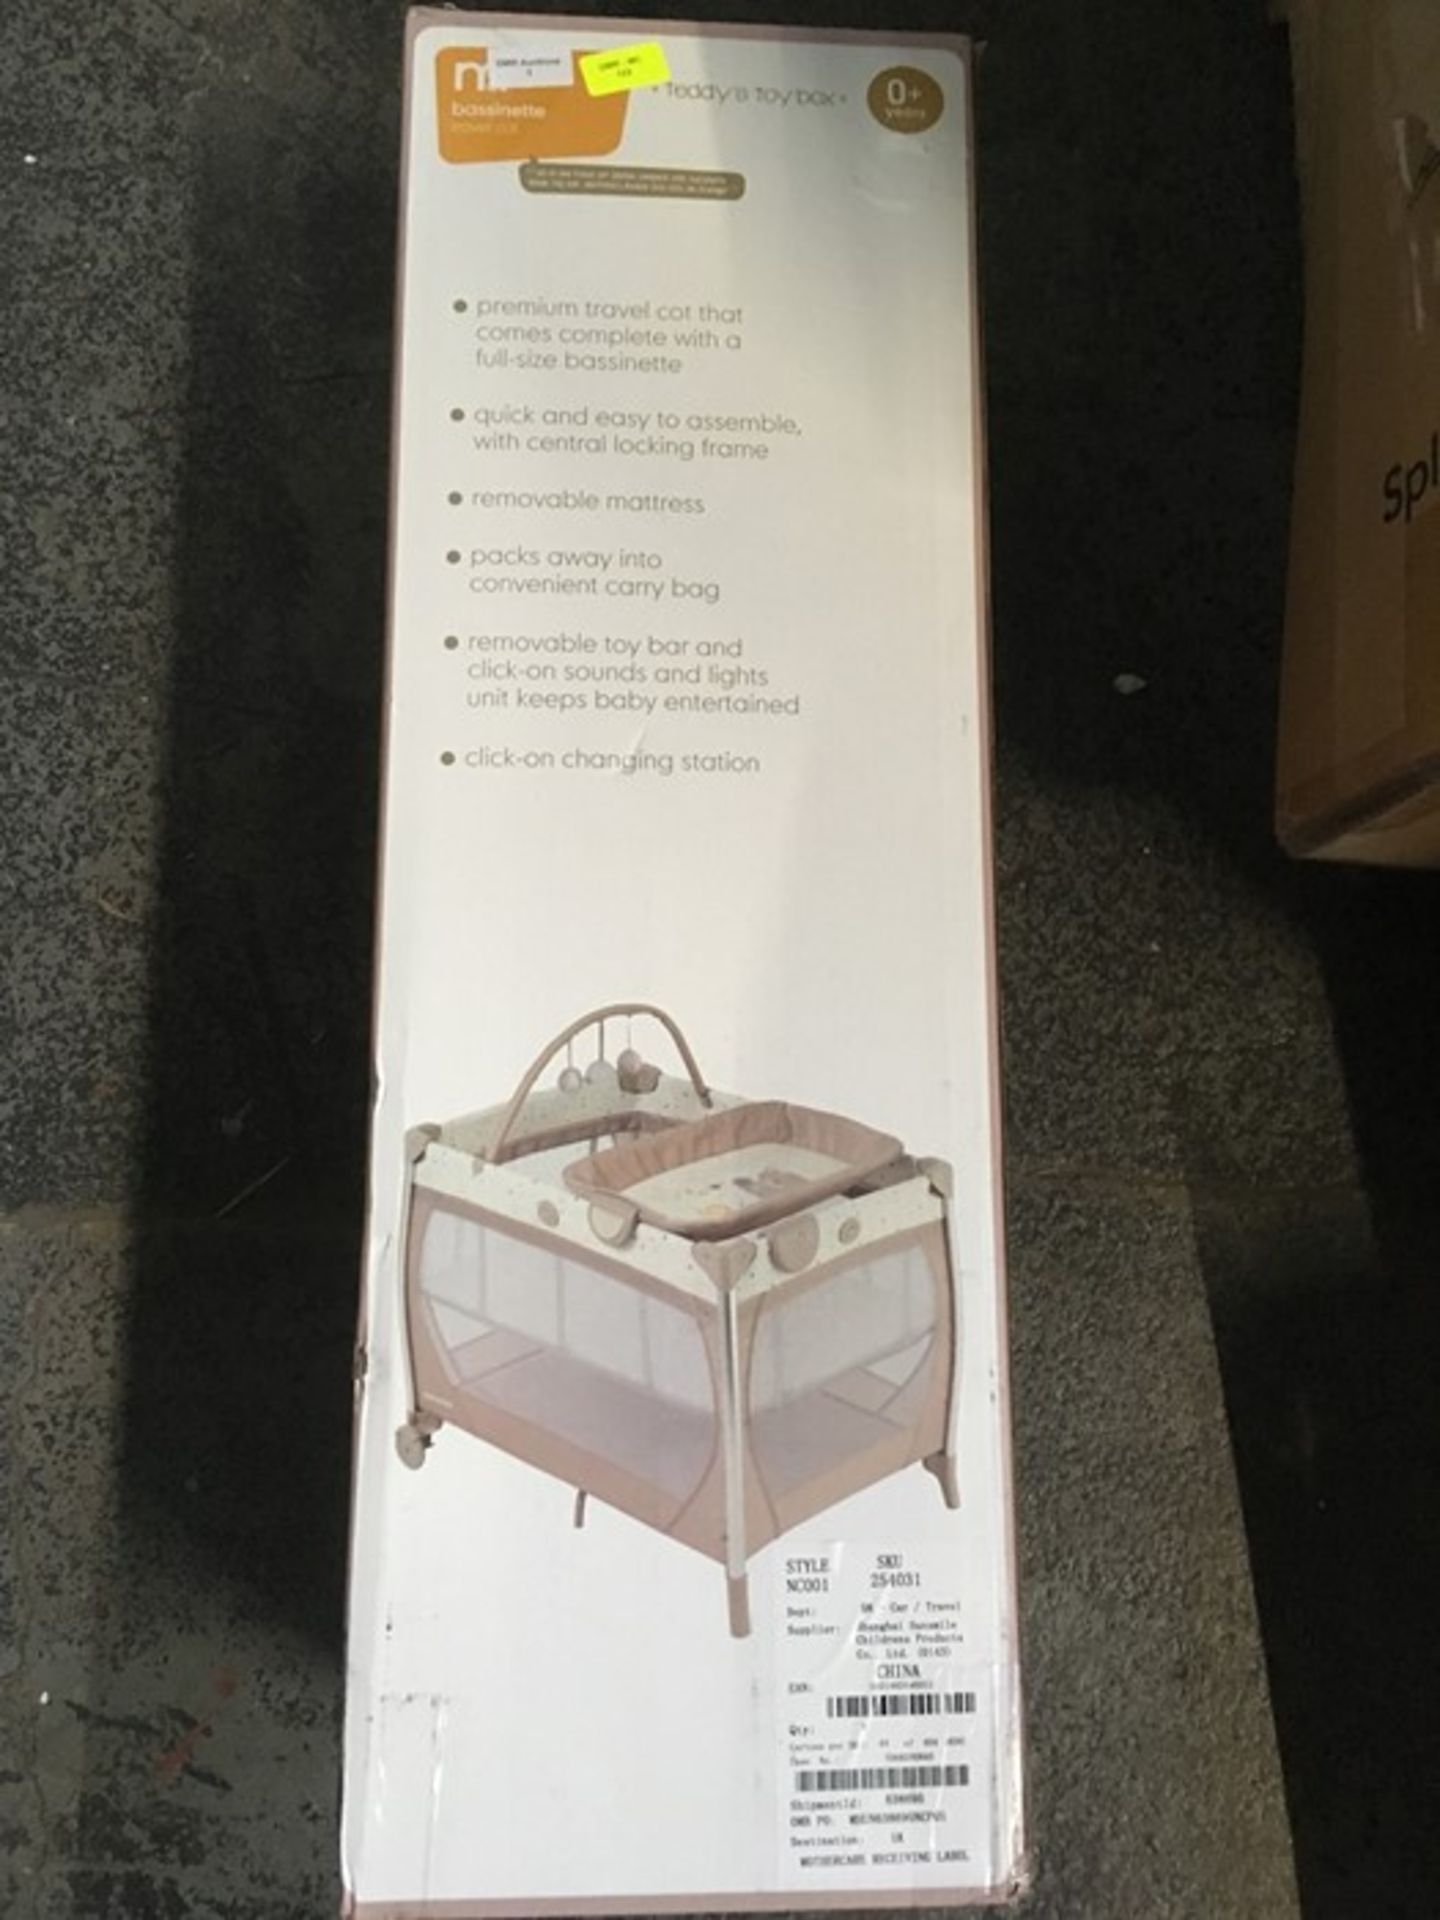 1 BOXED MOTHERCARE BASSINETTE TRAVEL COT - TEDDY'S TOY BOX / RRP £120.00 (PUBLIC VIEWING AVAILABLE)